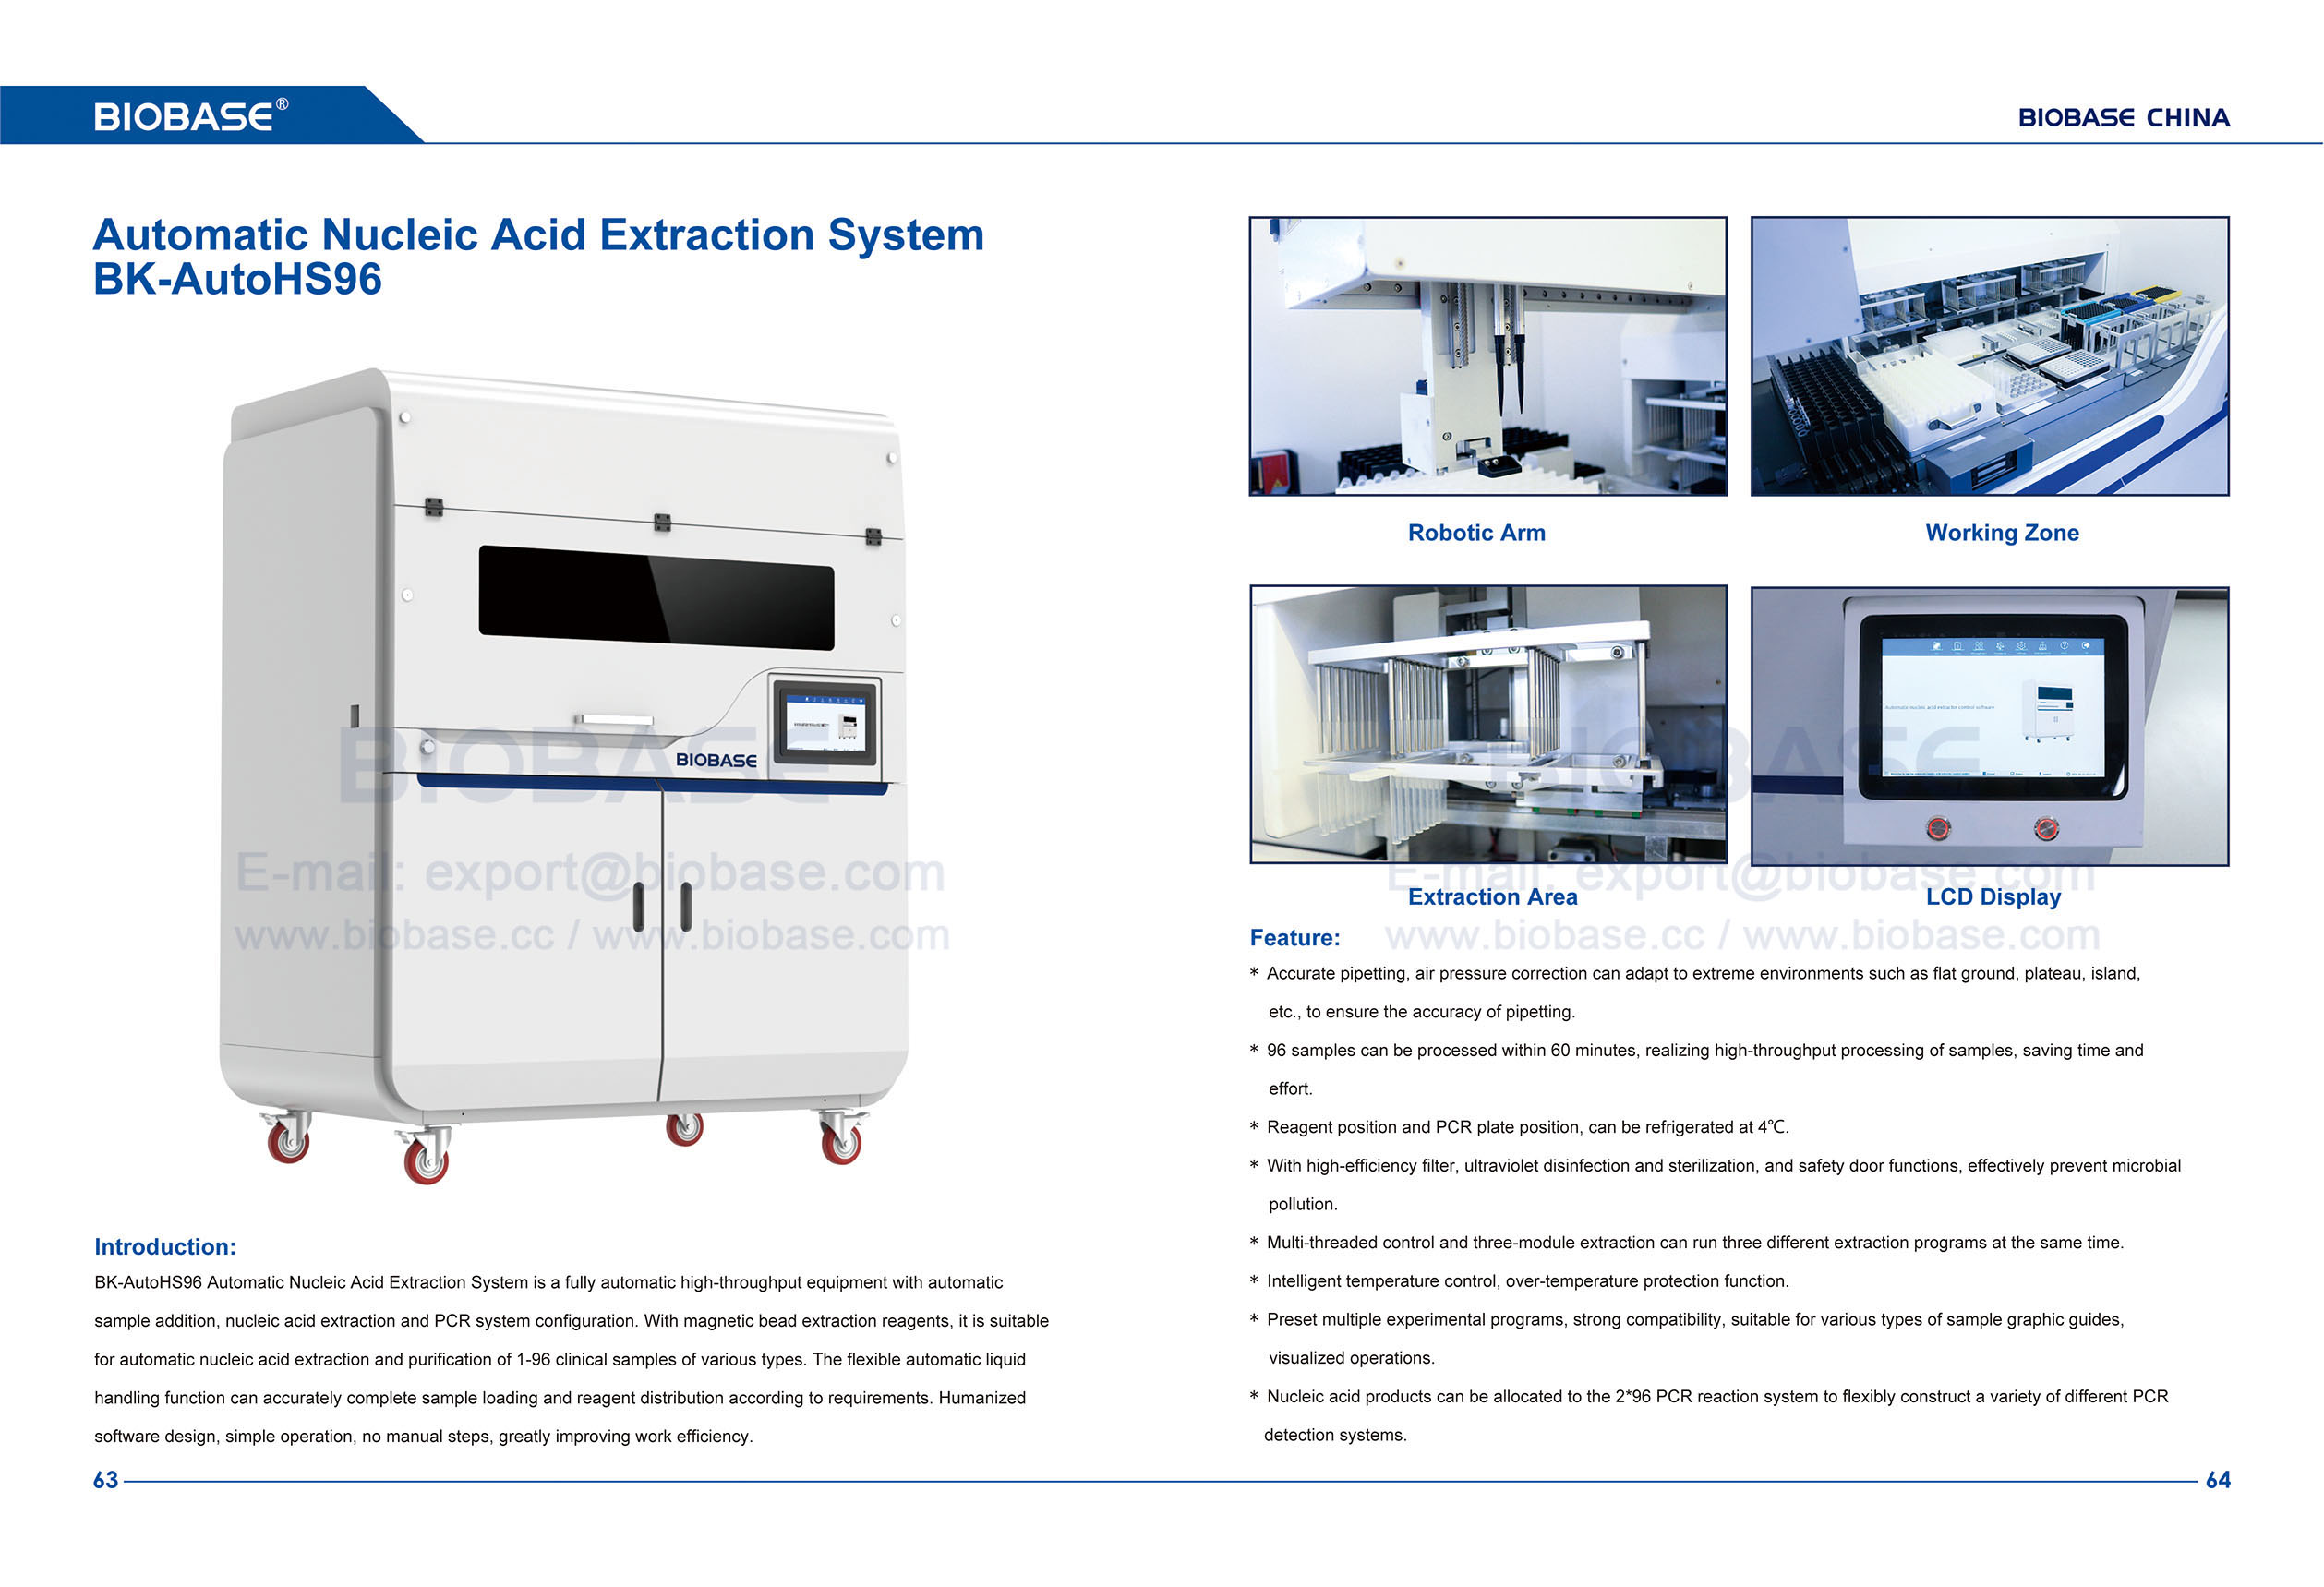 63-64 Automatic Nucleic Acid Extraction System BK-AutoHS96